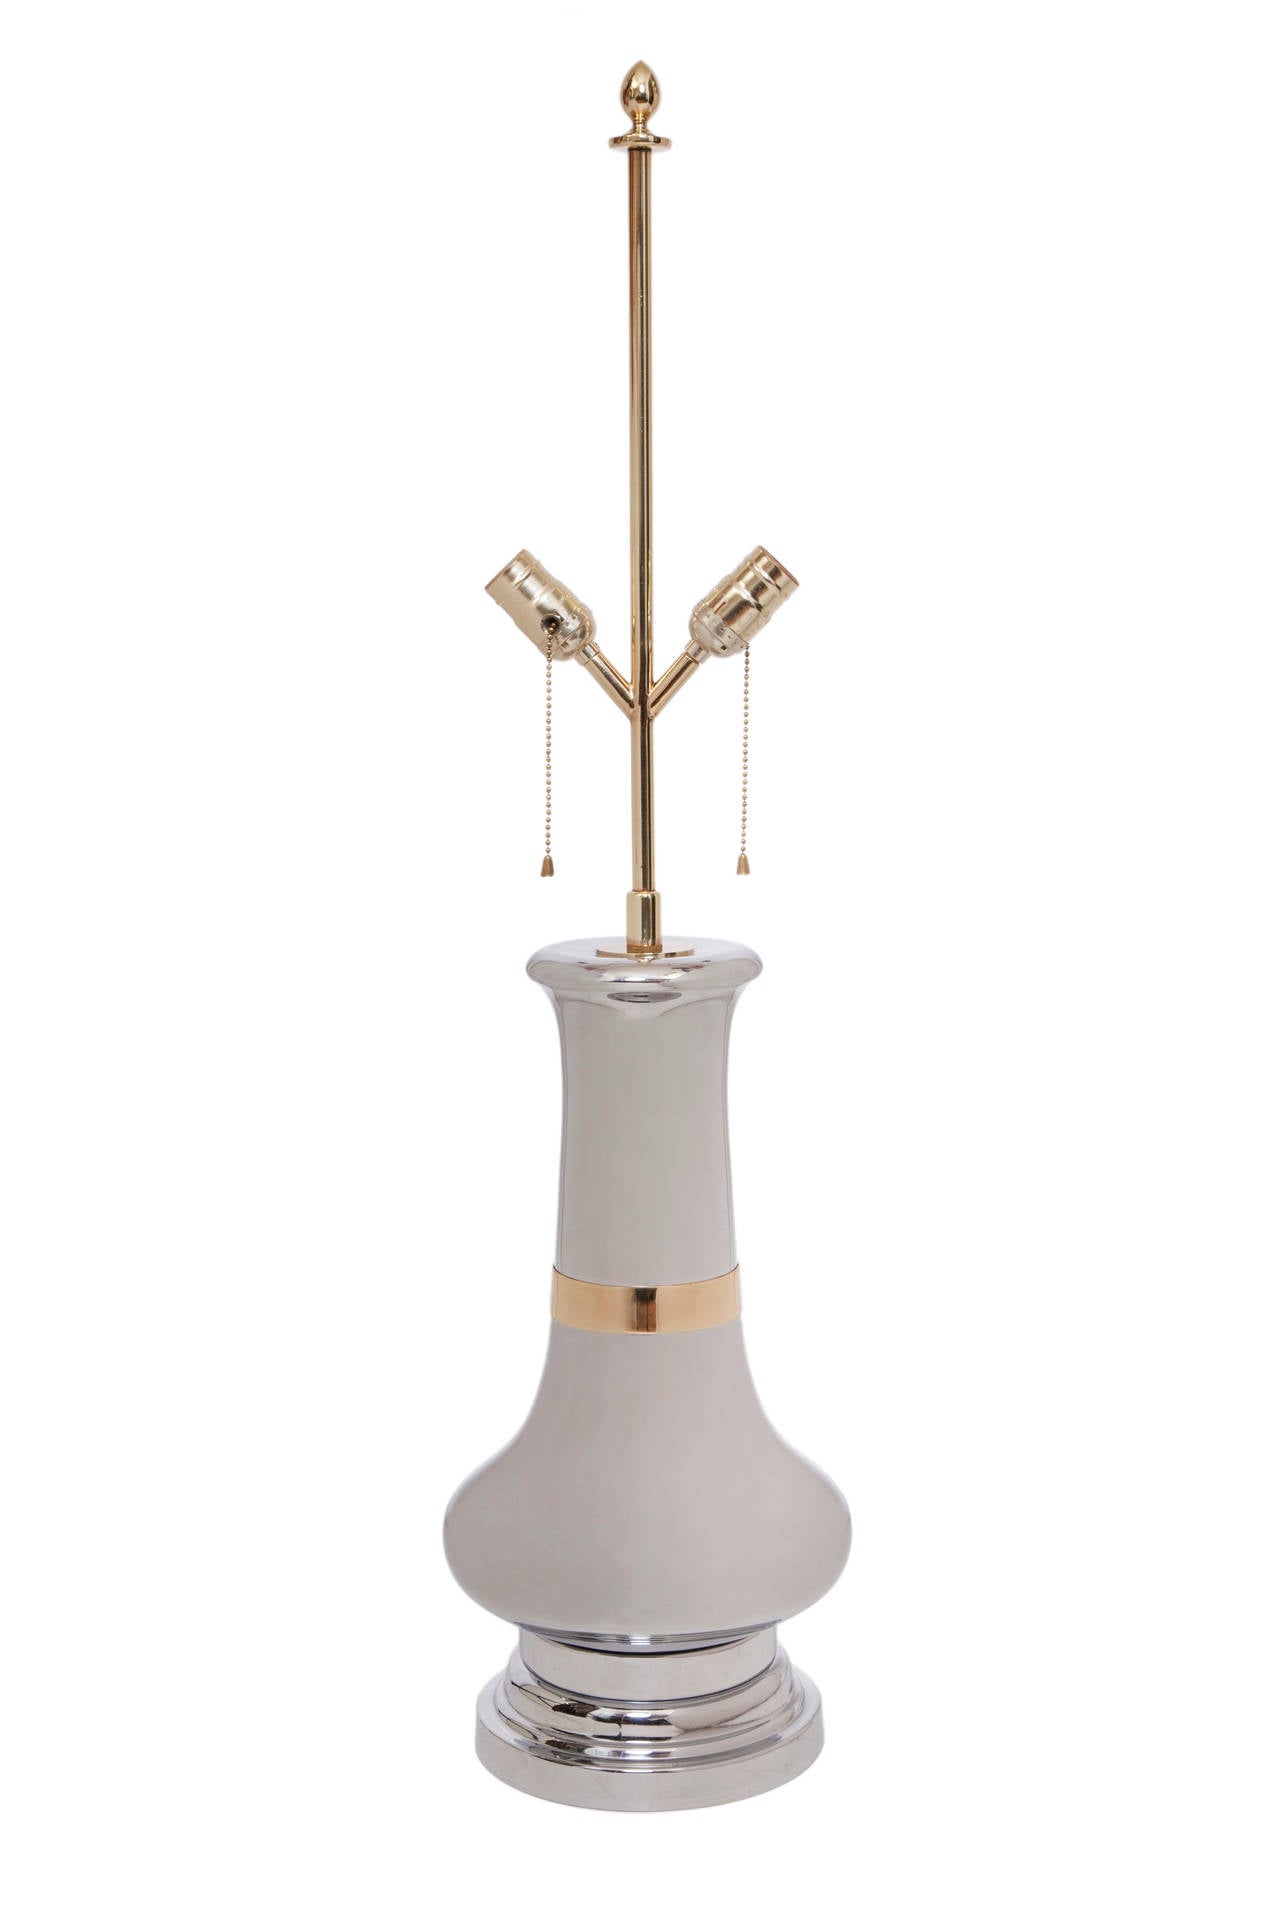 A pair of vintage table lamps, produced circa 1970s, with angled, double-cluster sockets, set mid-length against a brass stem, above a baluster body in plated chrome, with polished brass band, above a stepped circular foot. Wiring and sockets to US